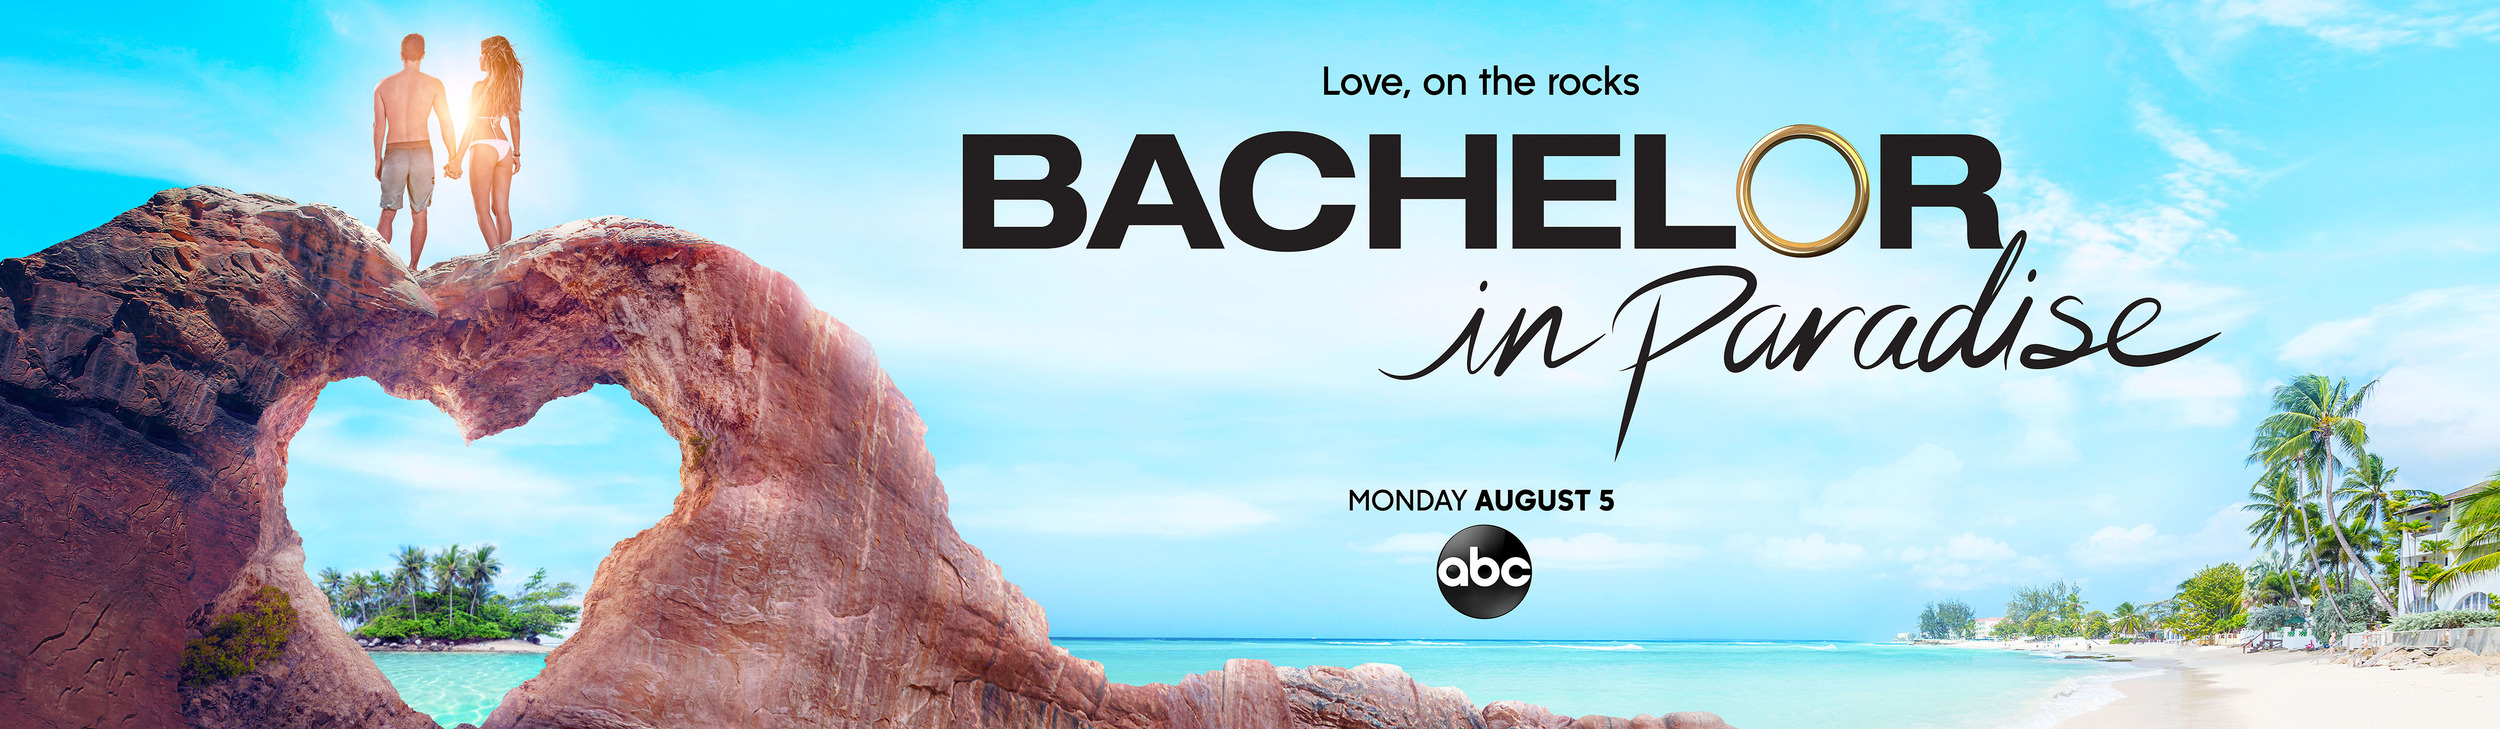 Mega Sized TV Poster Image for Bachelor in Paradise (#2 of 6)